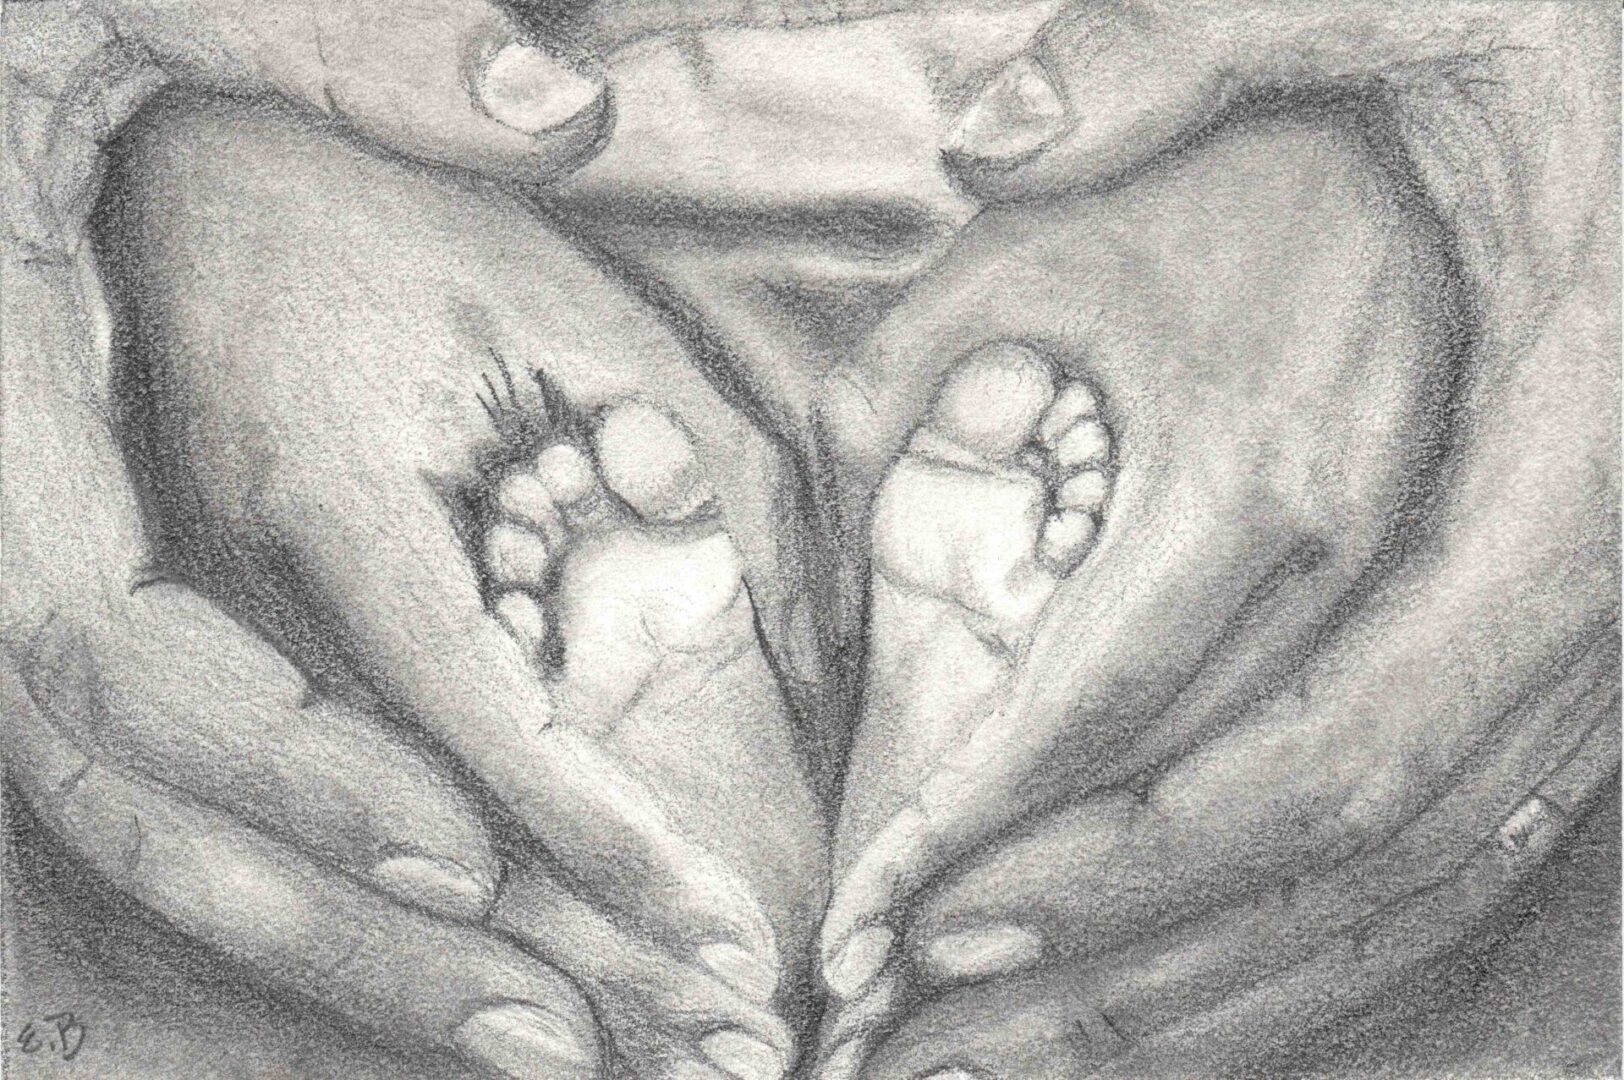 A drawing of two hands and feet with their arms around each other.